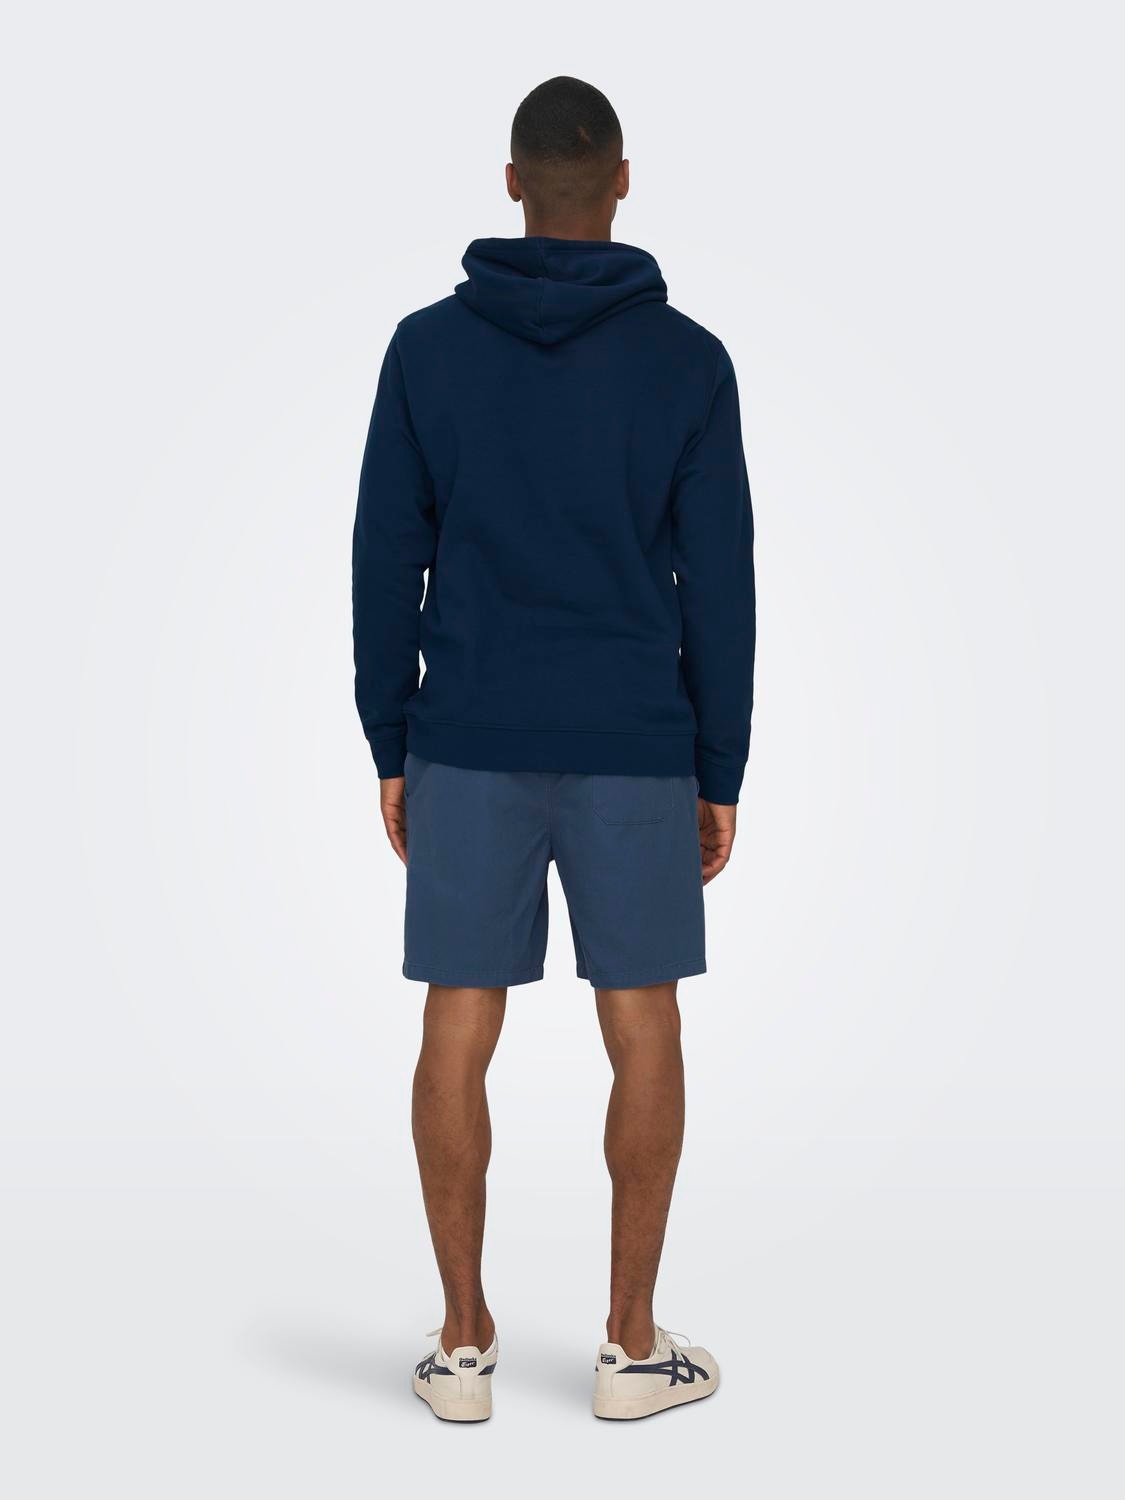 ONLY & SONS Normal passform Hoodie Sweatshirt -Pageant Blue - 22026331